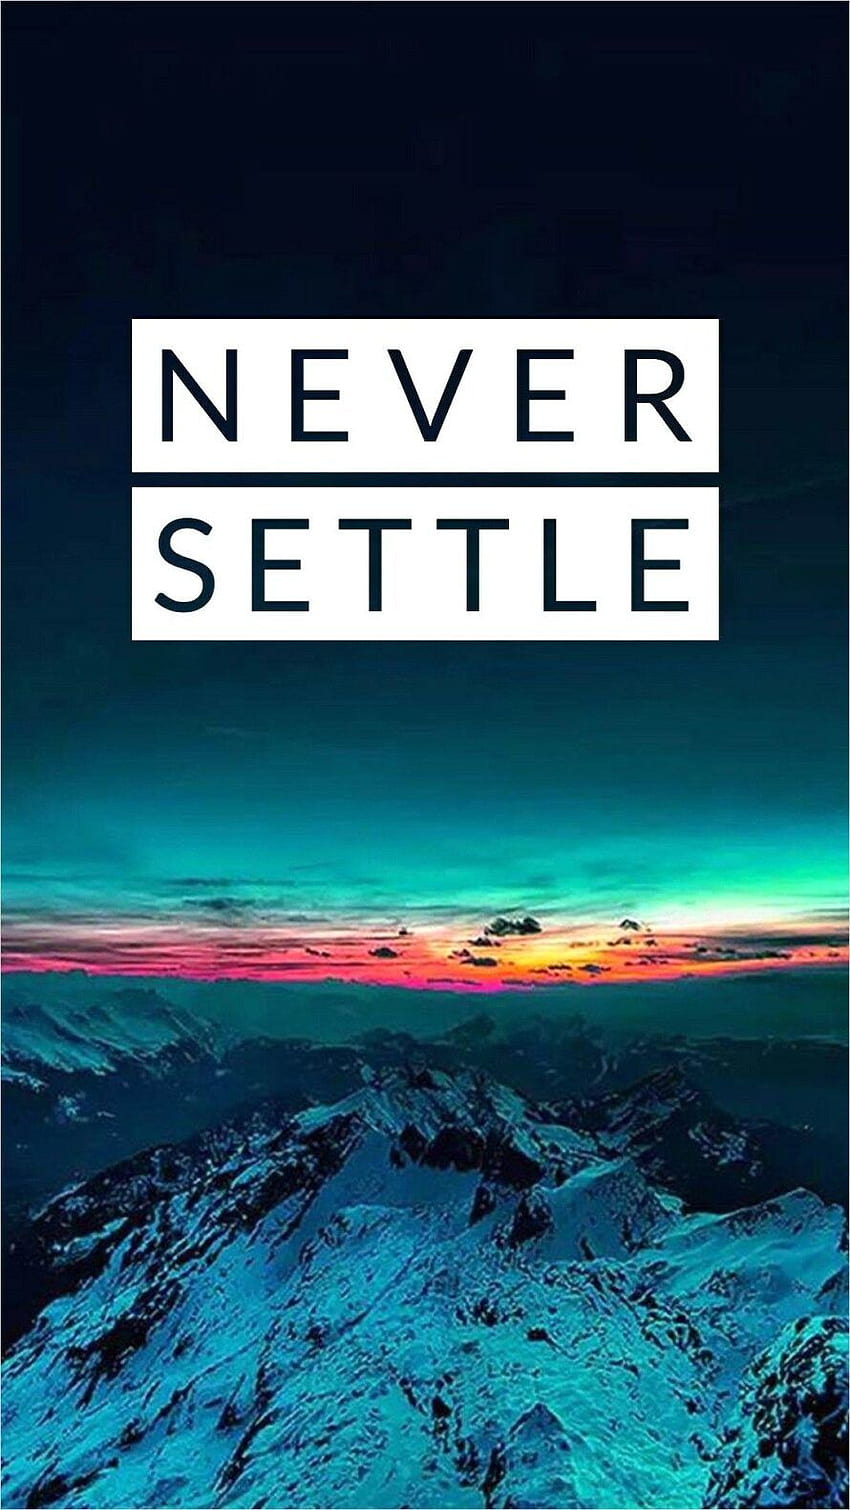 Amoled For Oneplus 6t. Oneplus , Never settle , design, OnePlus Amoled HD phone wallpaper